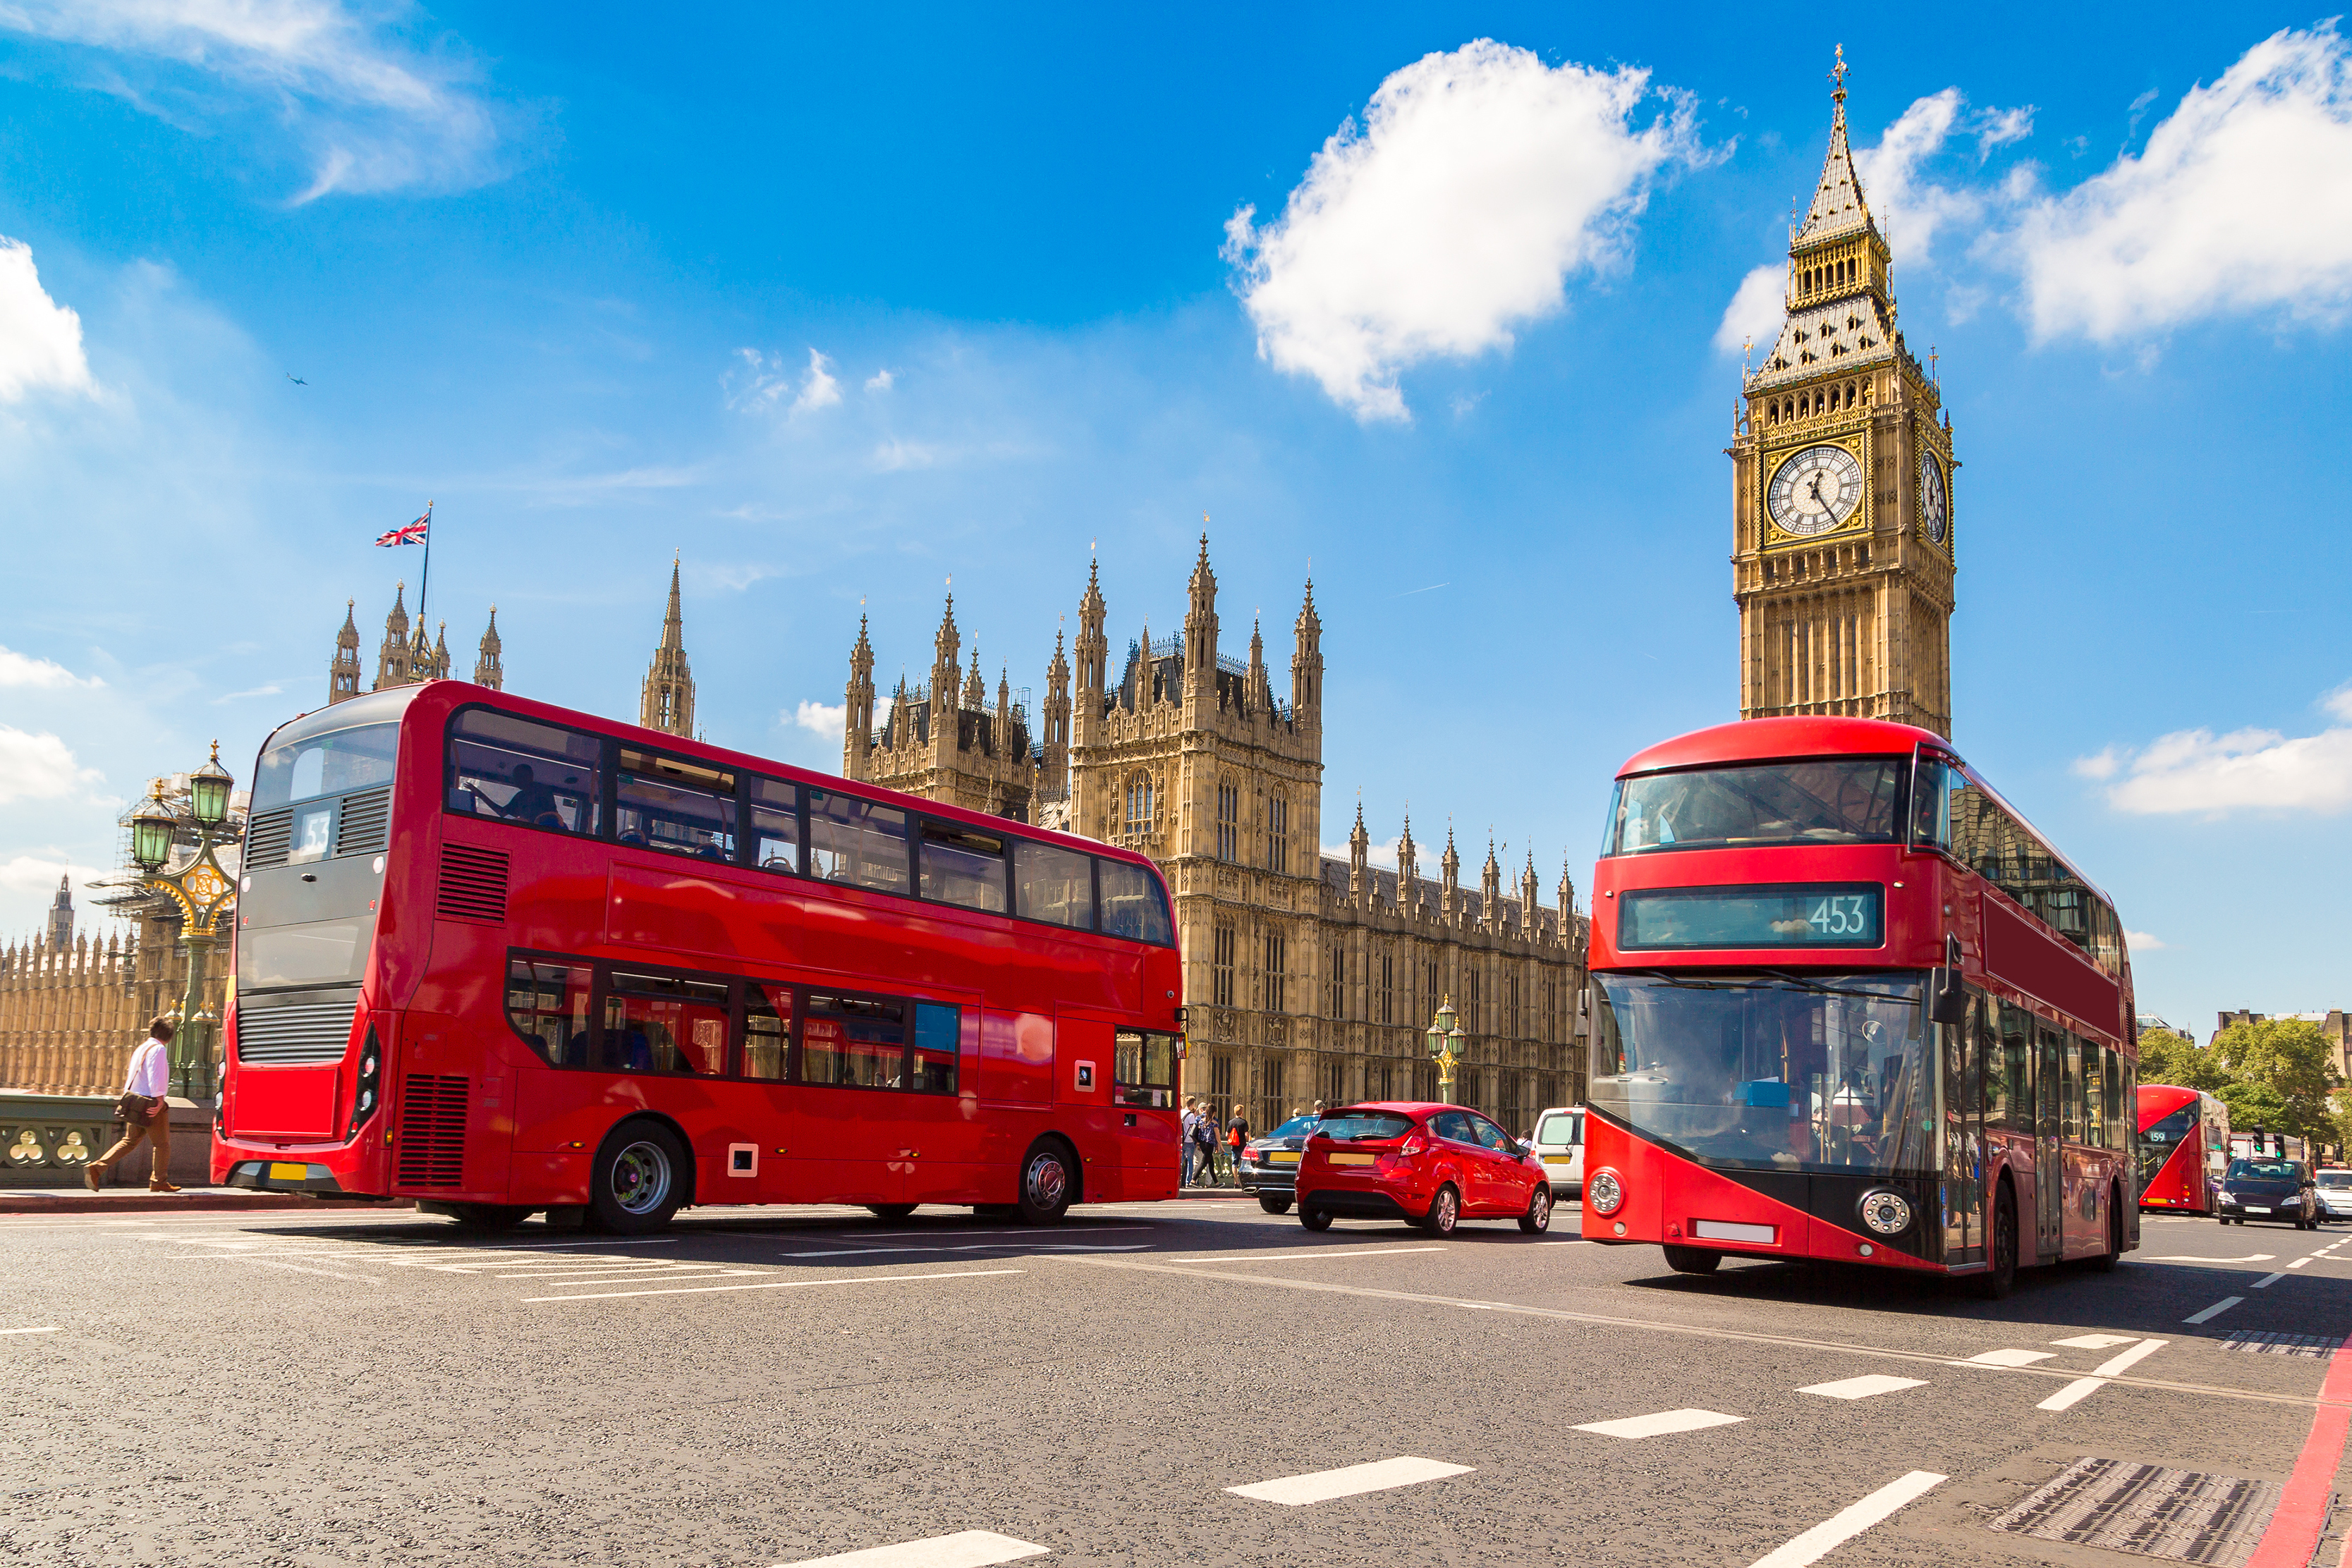 Tips to Find Best Places in London